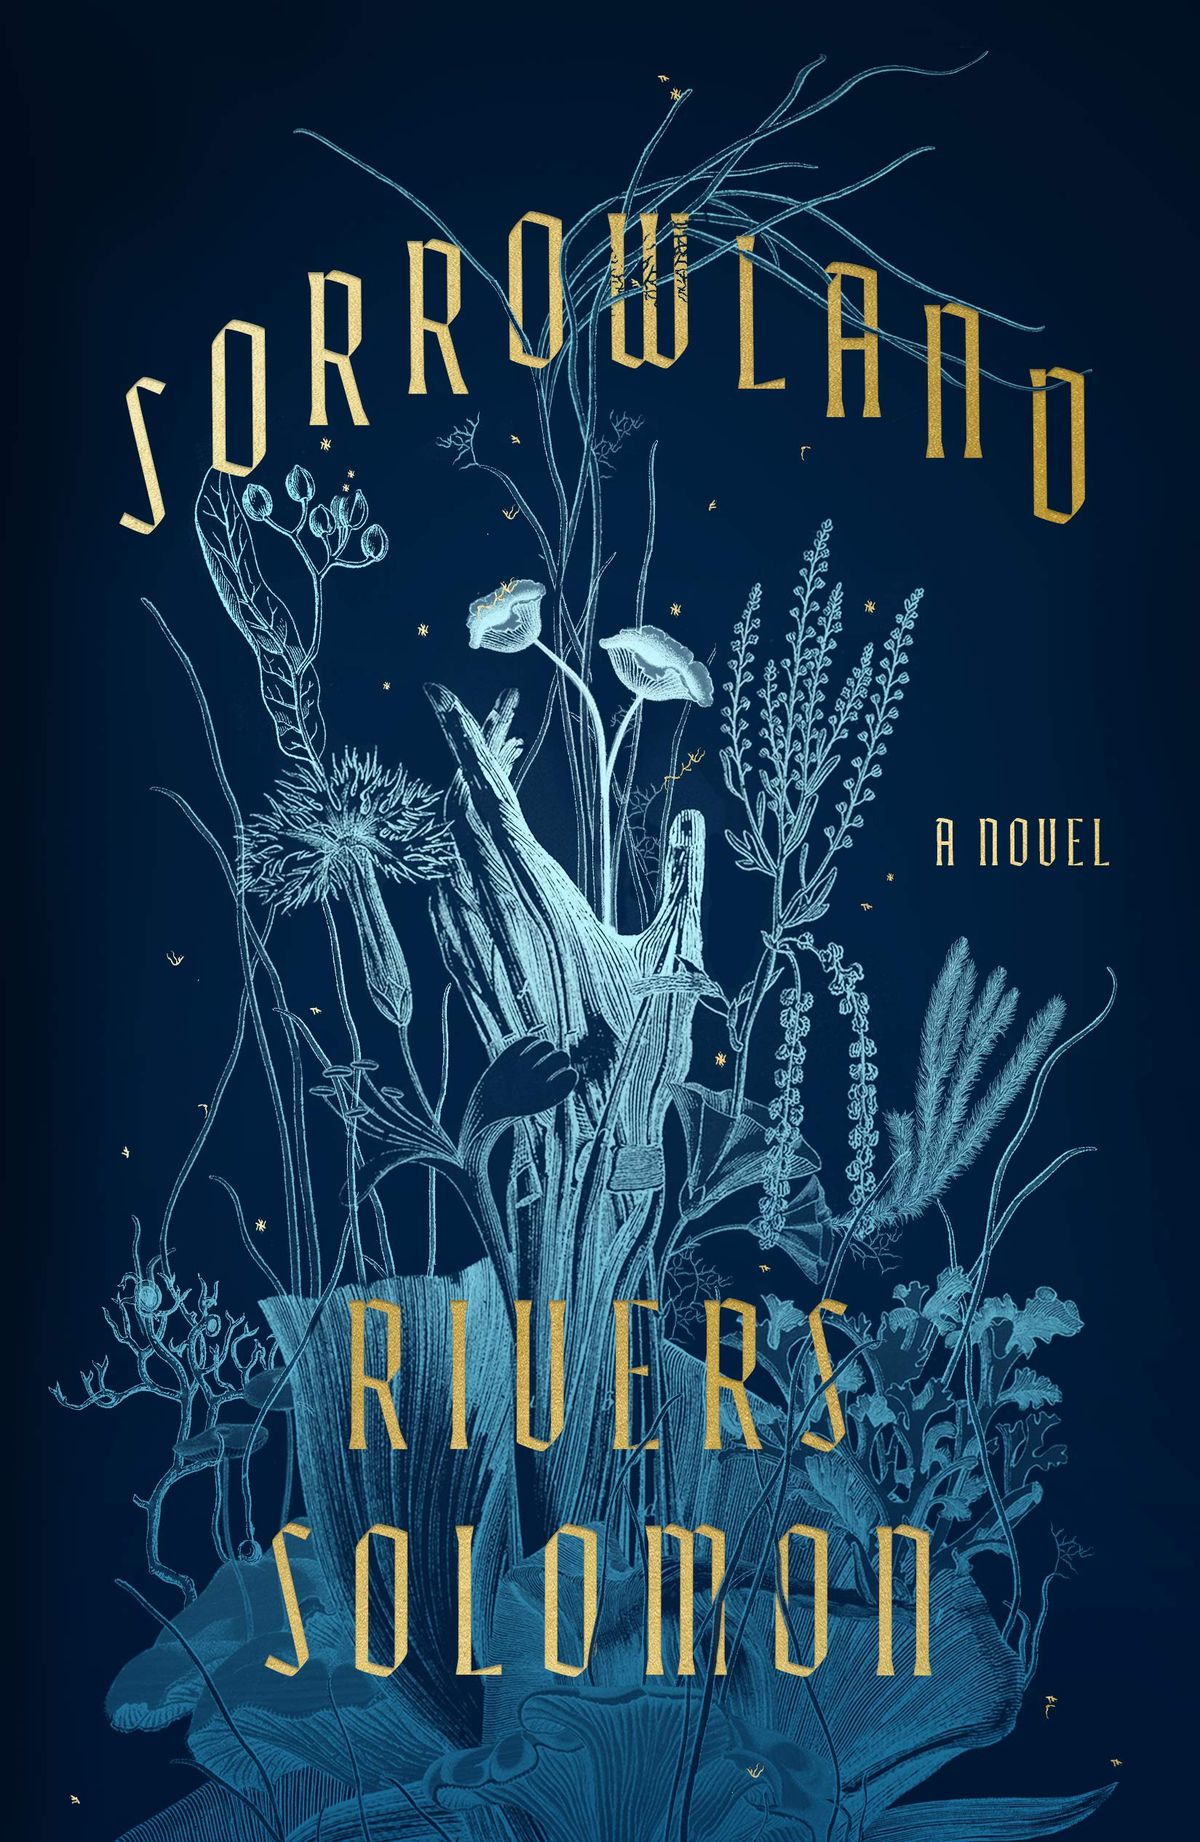 The cover for “Sorrowland” by Rivers Solomon showing a bouquet of flowers in light blue against a dark blue backdrop